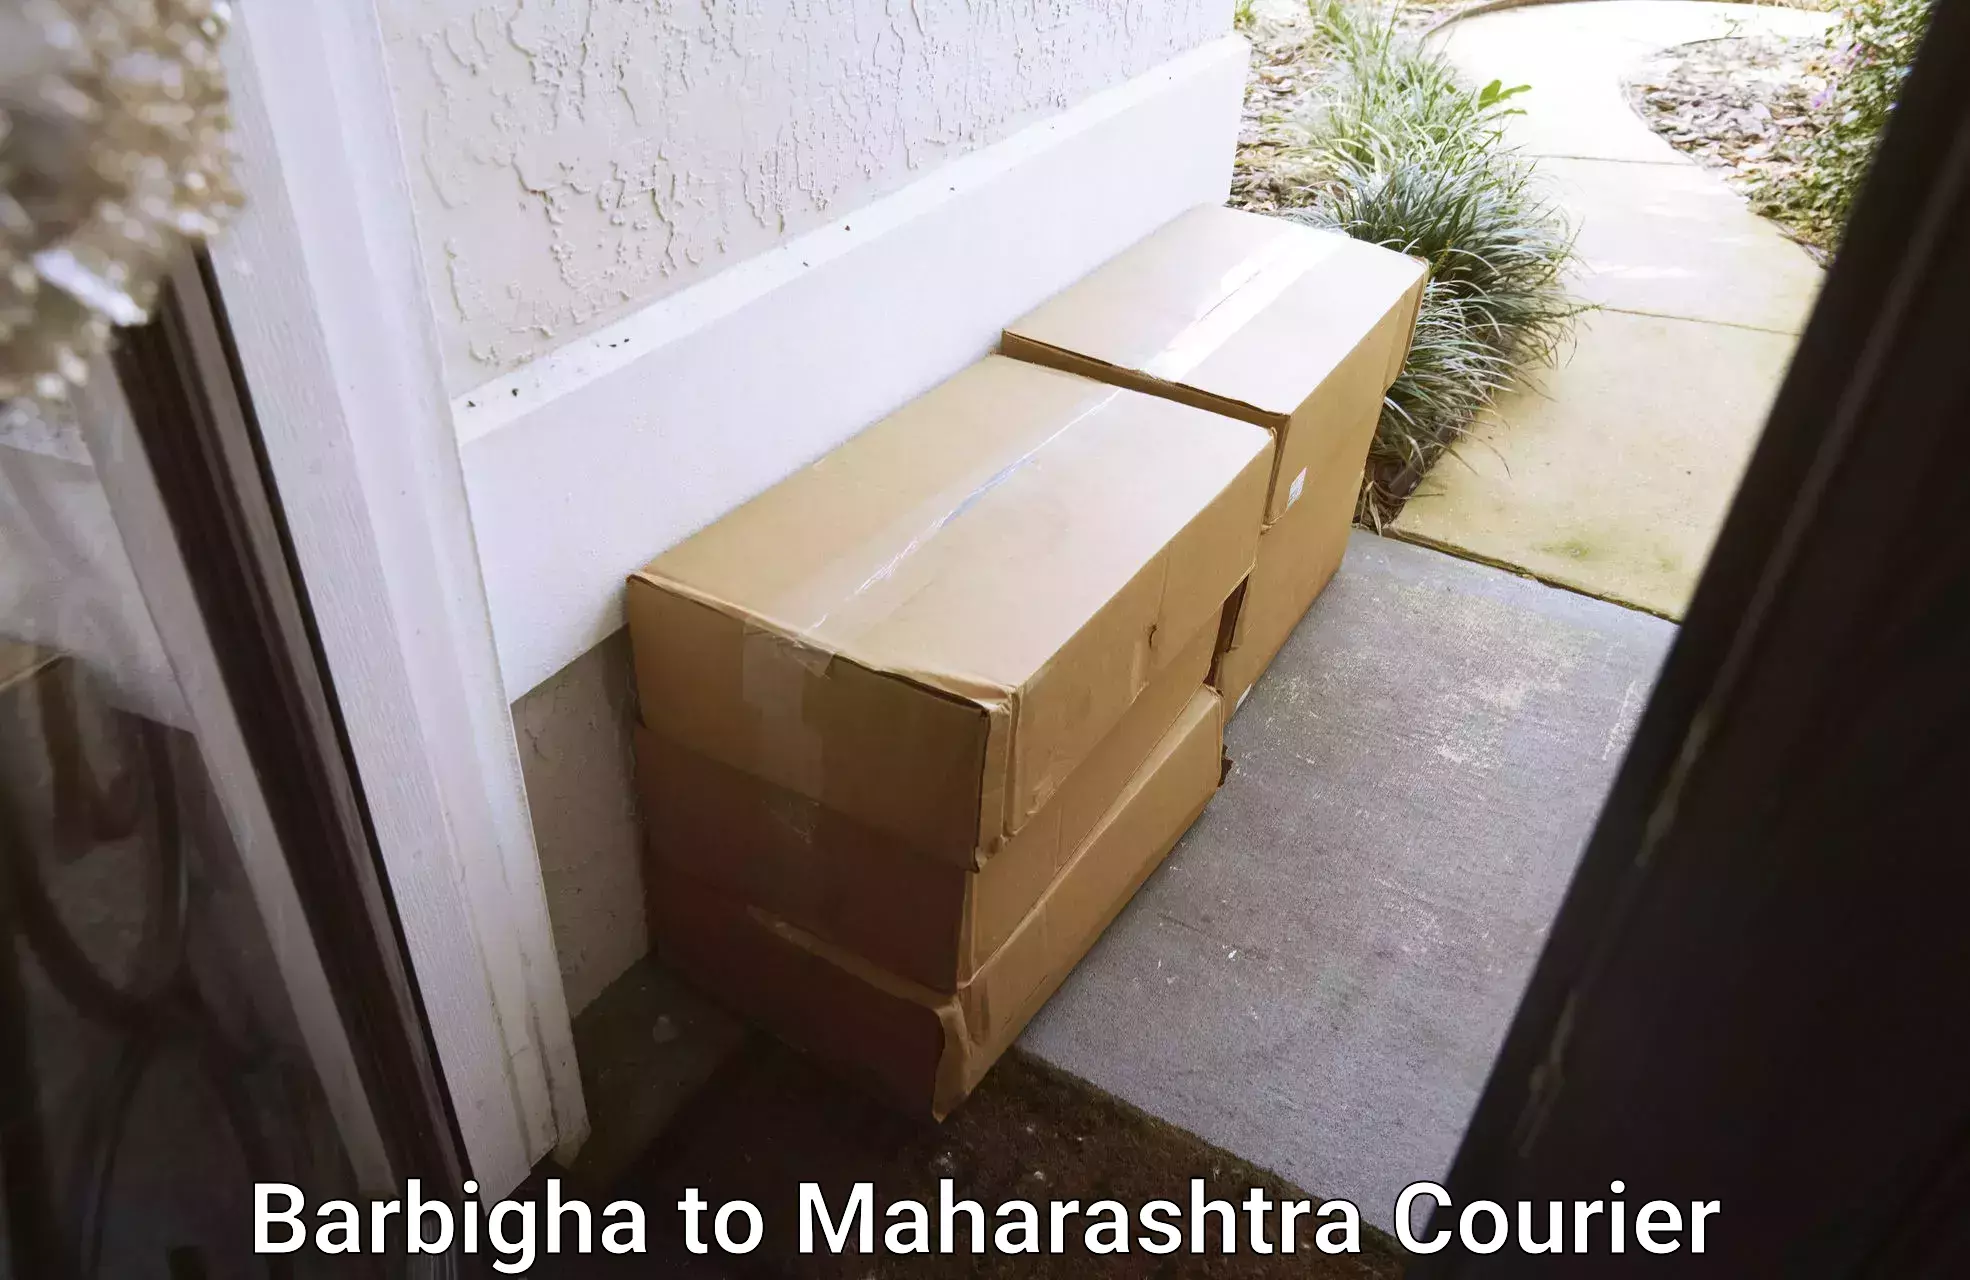 Furniture delivery service in Barbigha to Talegaon Dabhade